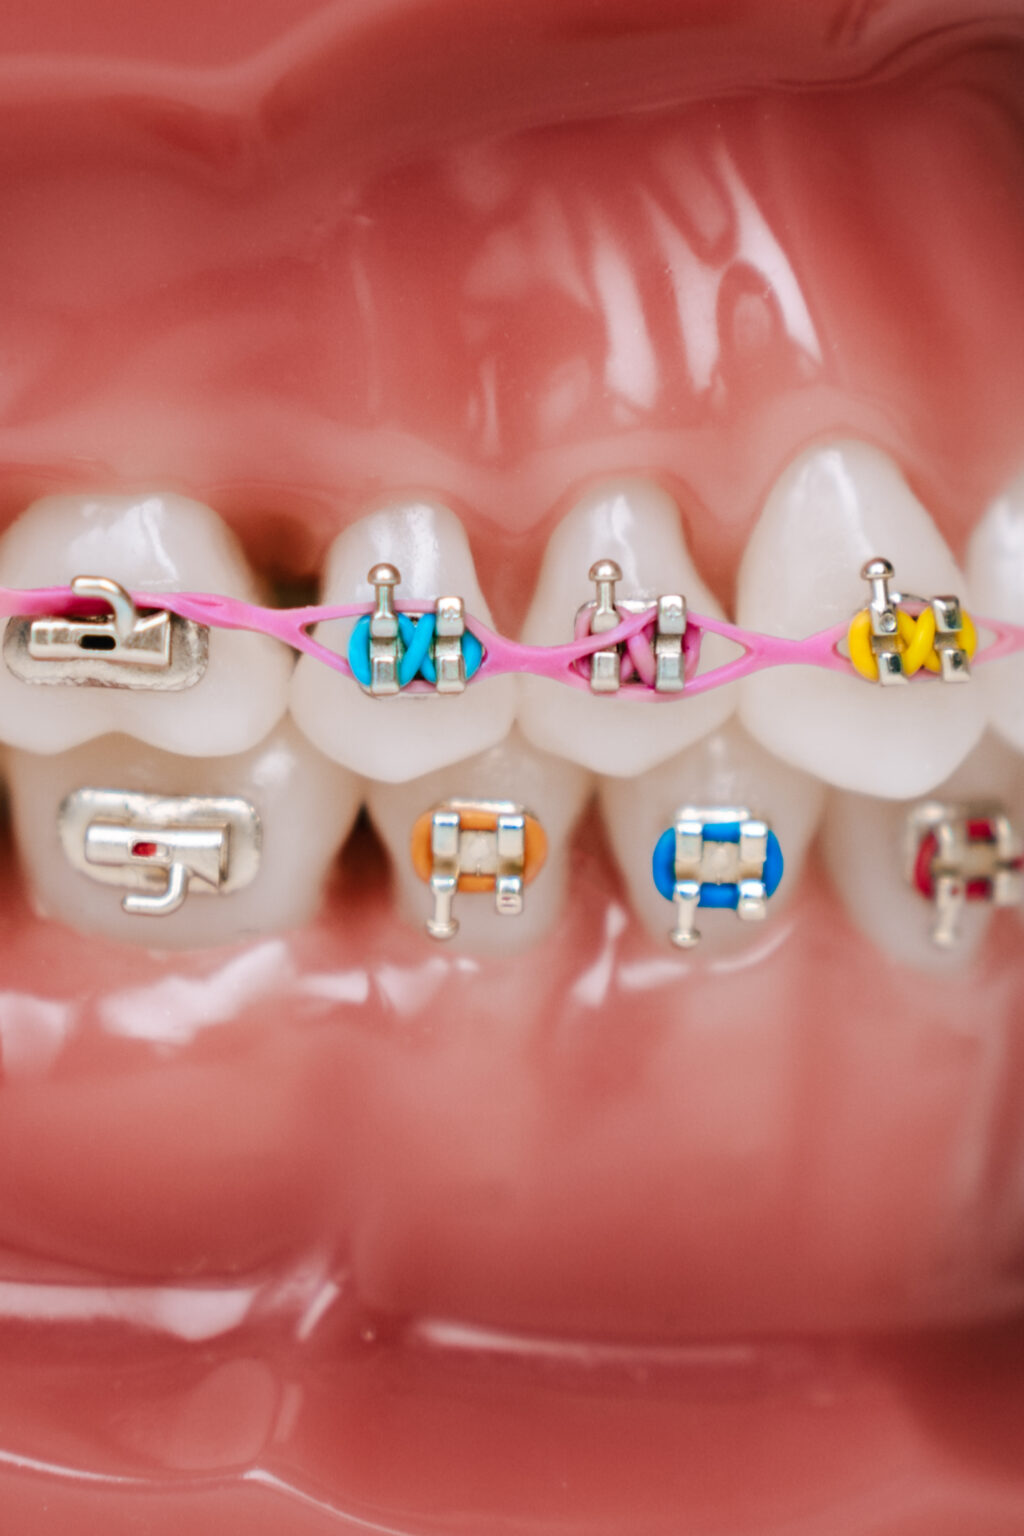 Are Rubber Bands on Braces Important?